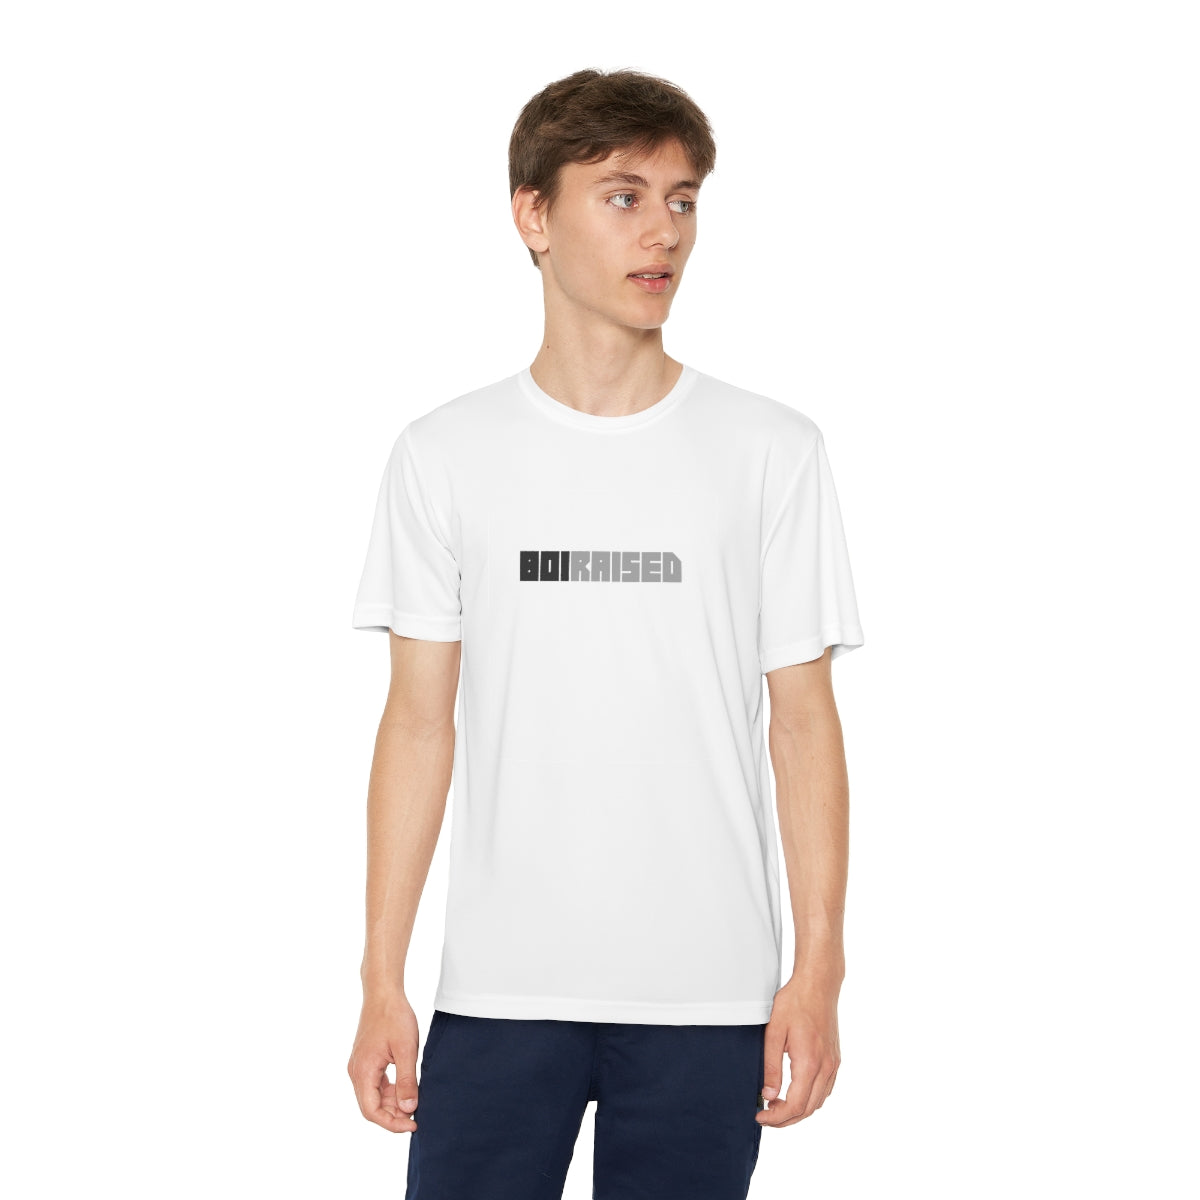 LOGO Youth Competitor Tee